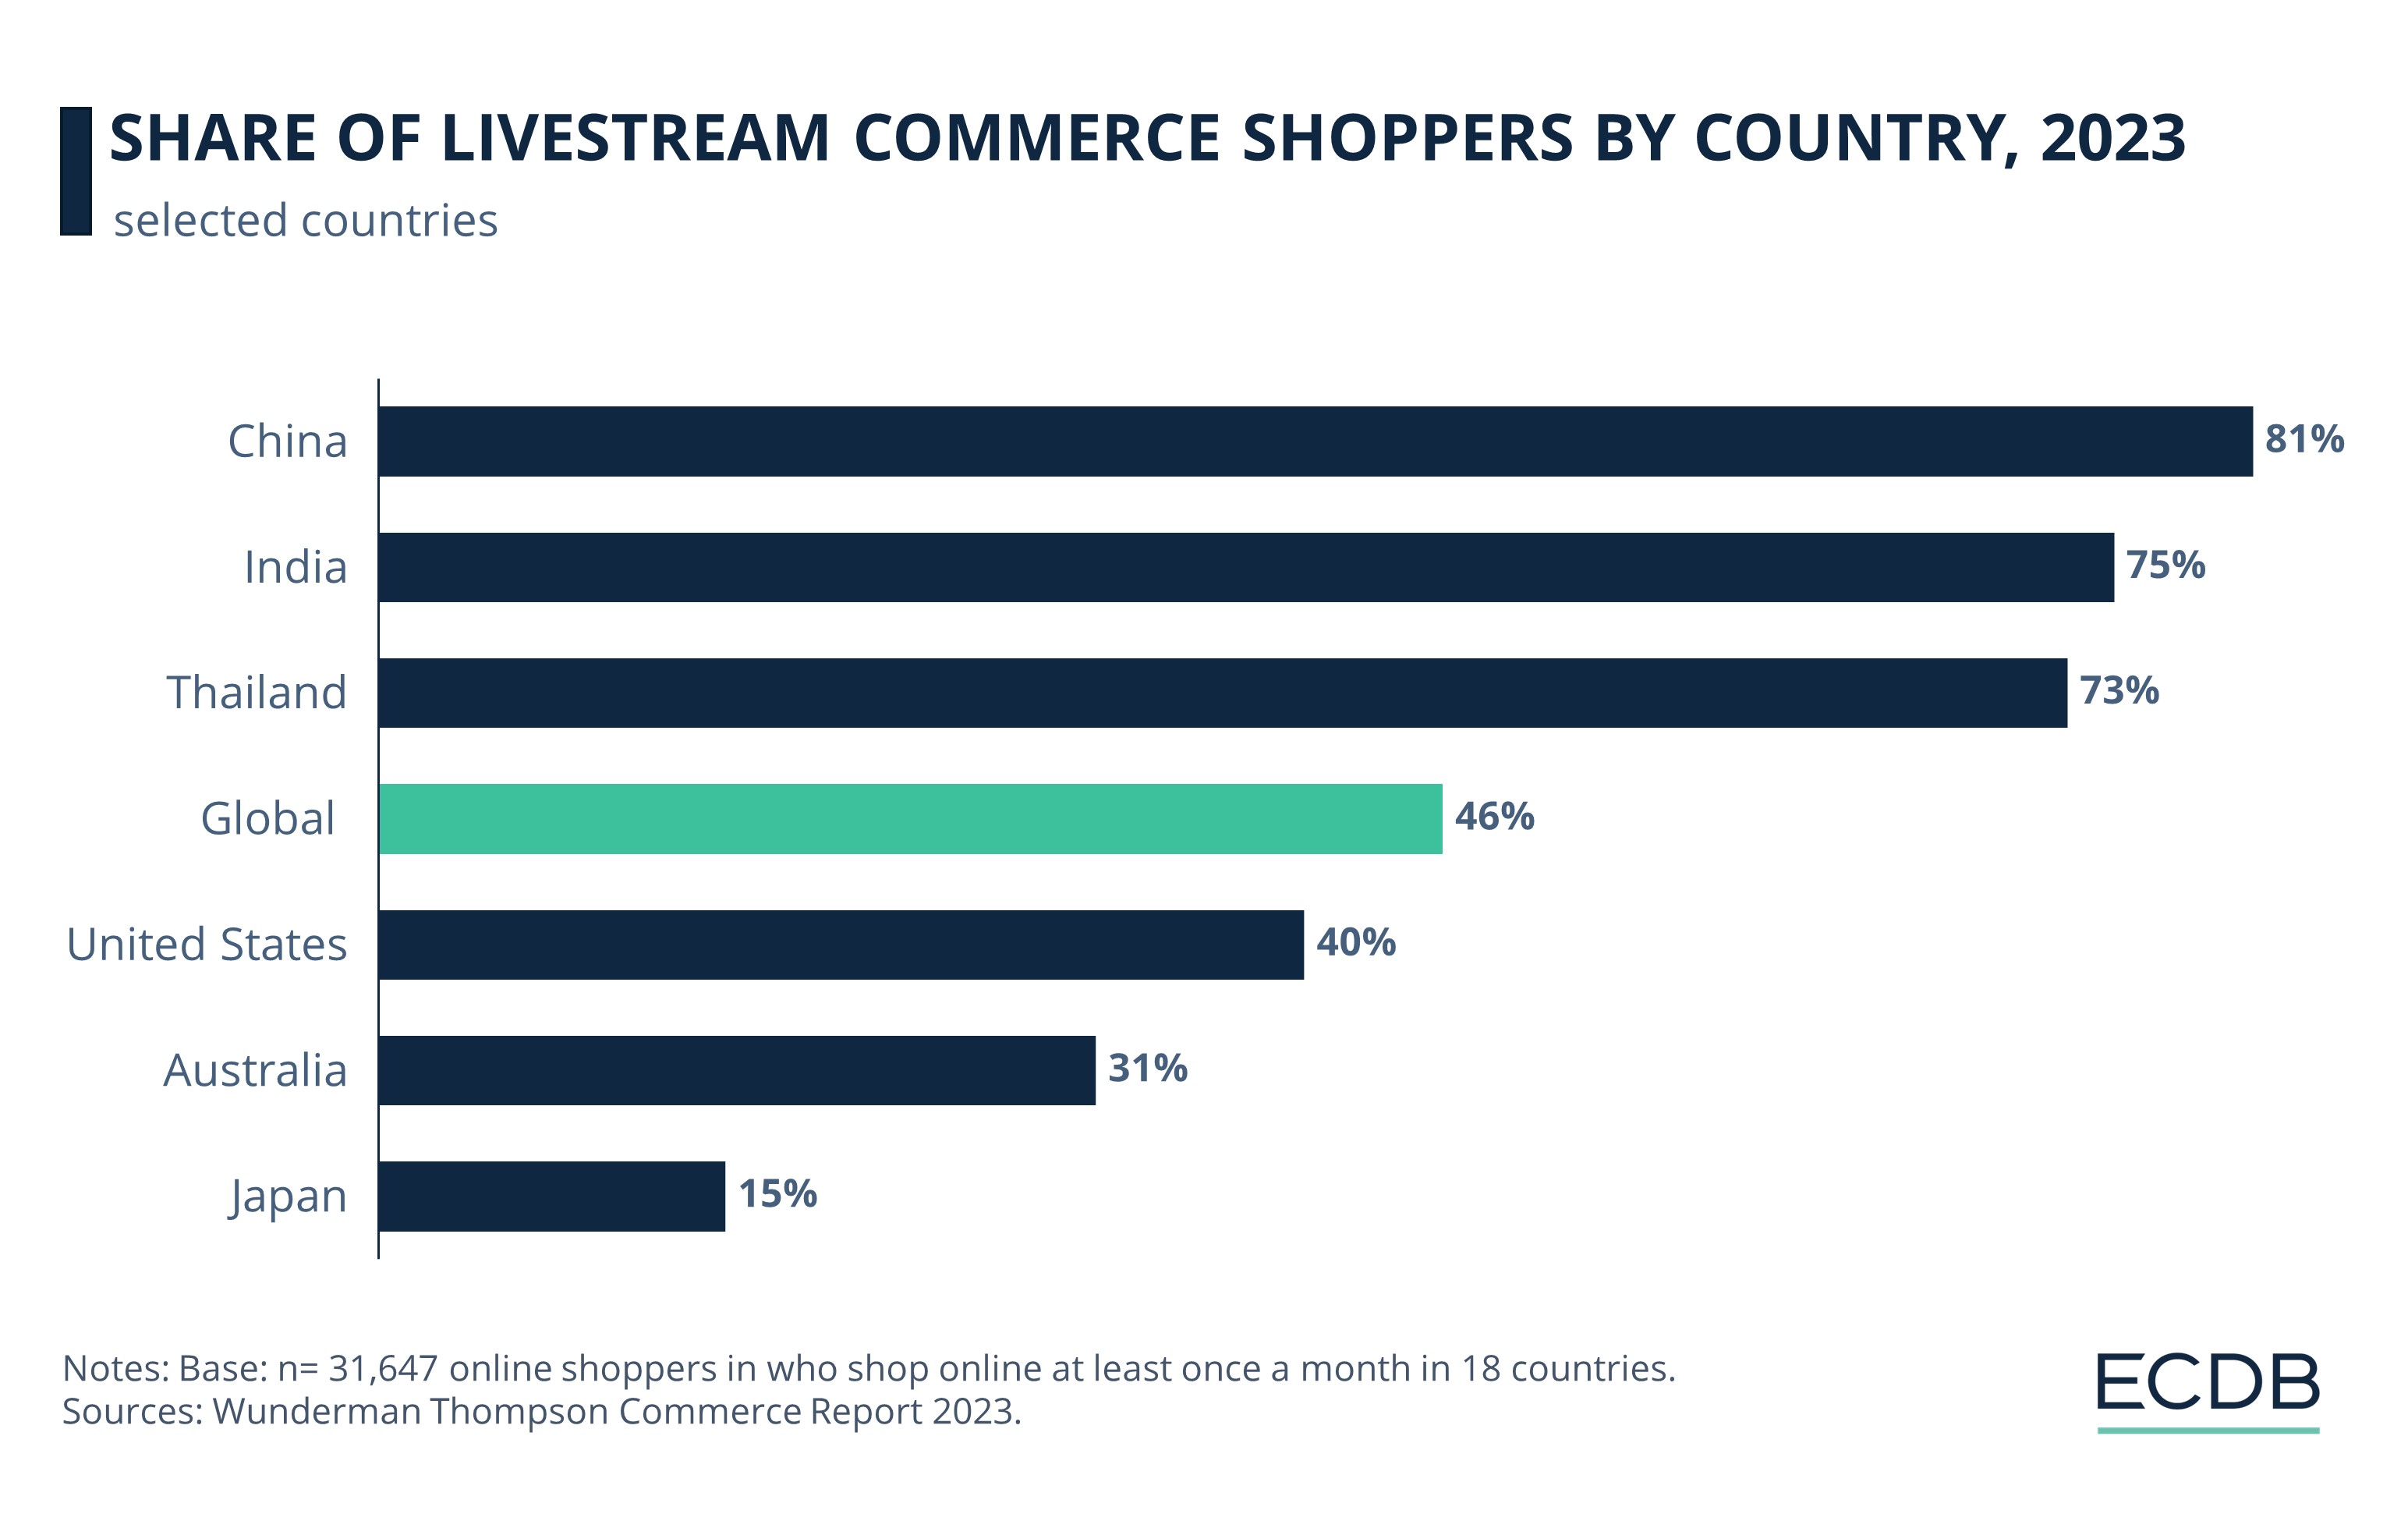 Share of Livestream Commerce Shoppers by Country, 2023